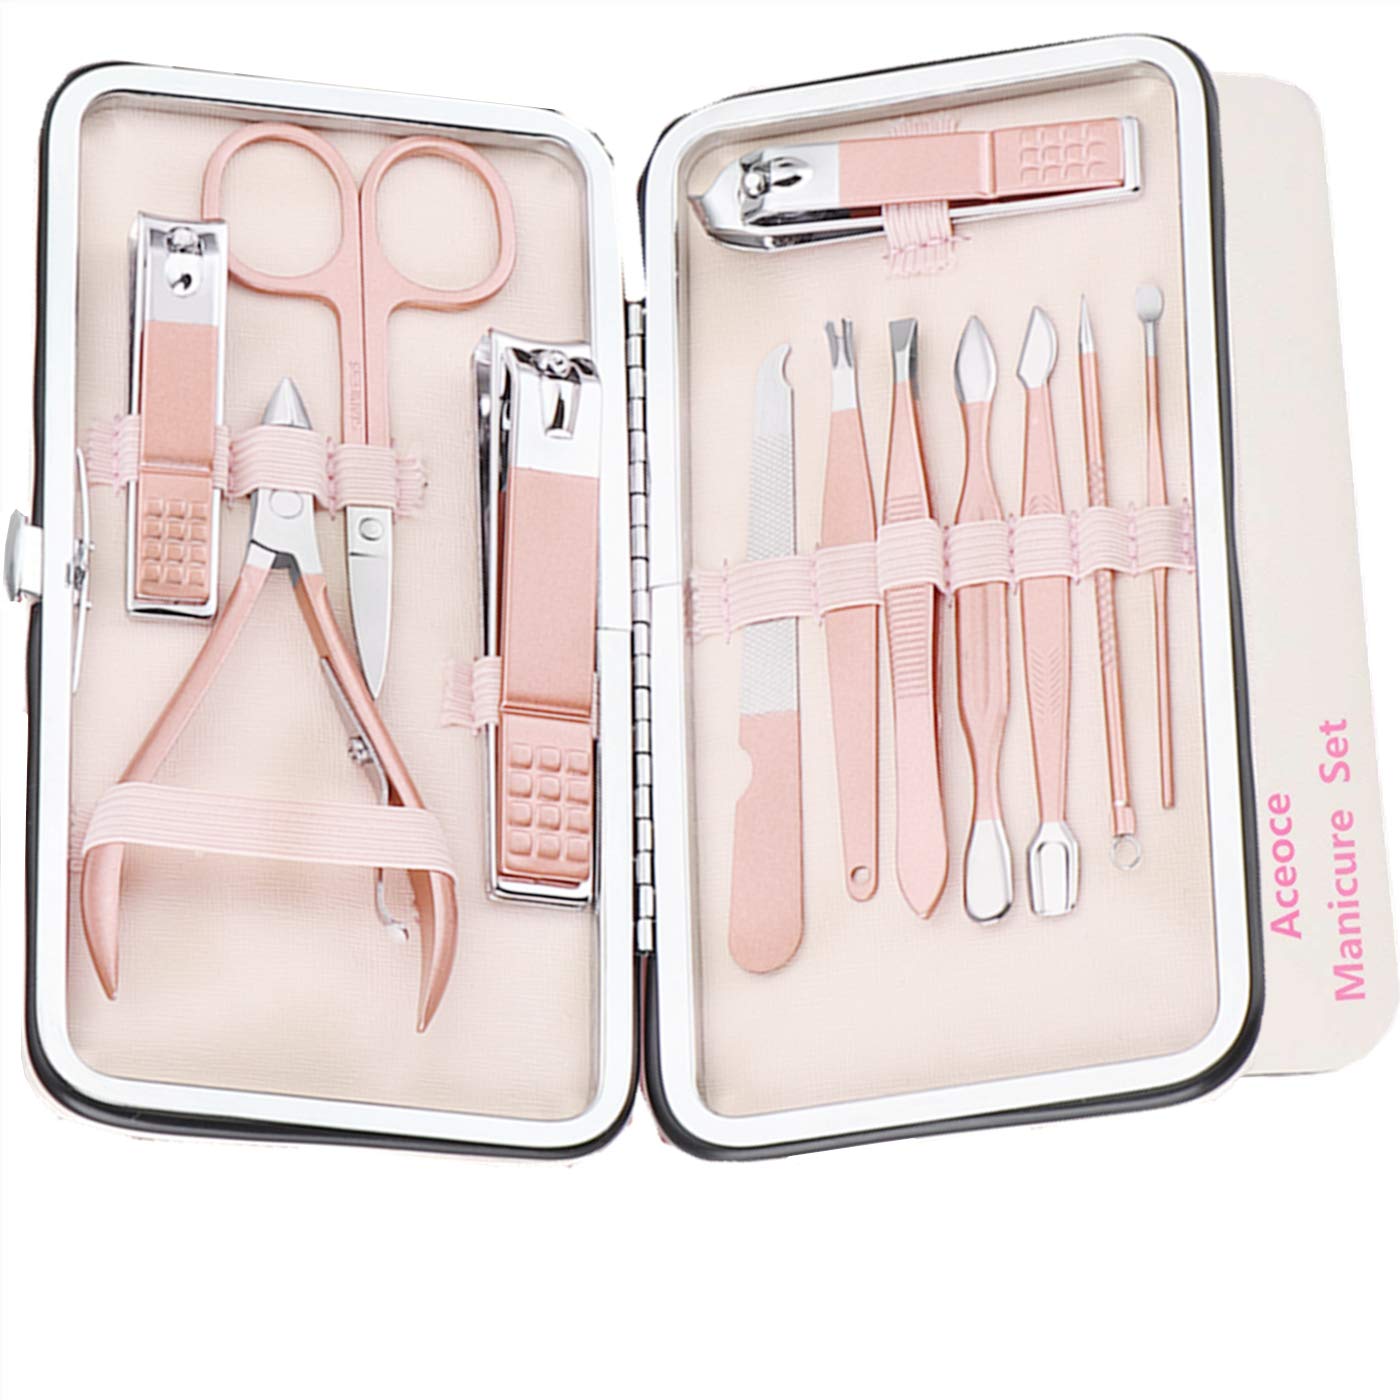 US 4-in-1 Baby Fineborn Grooming Kit Nail Clippers Scissor Nail File  Tweezer Set | eBay